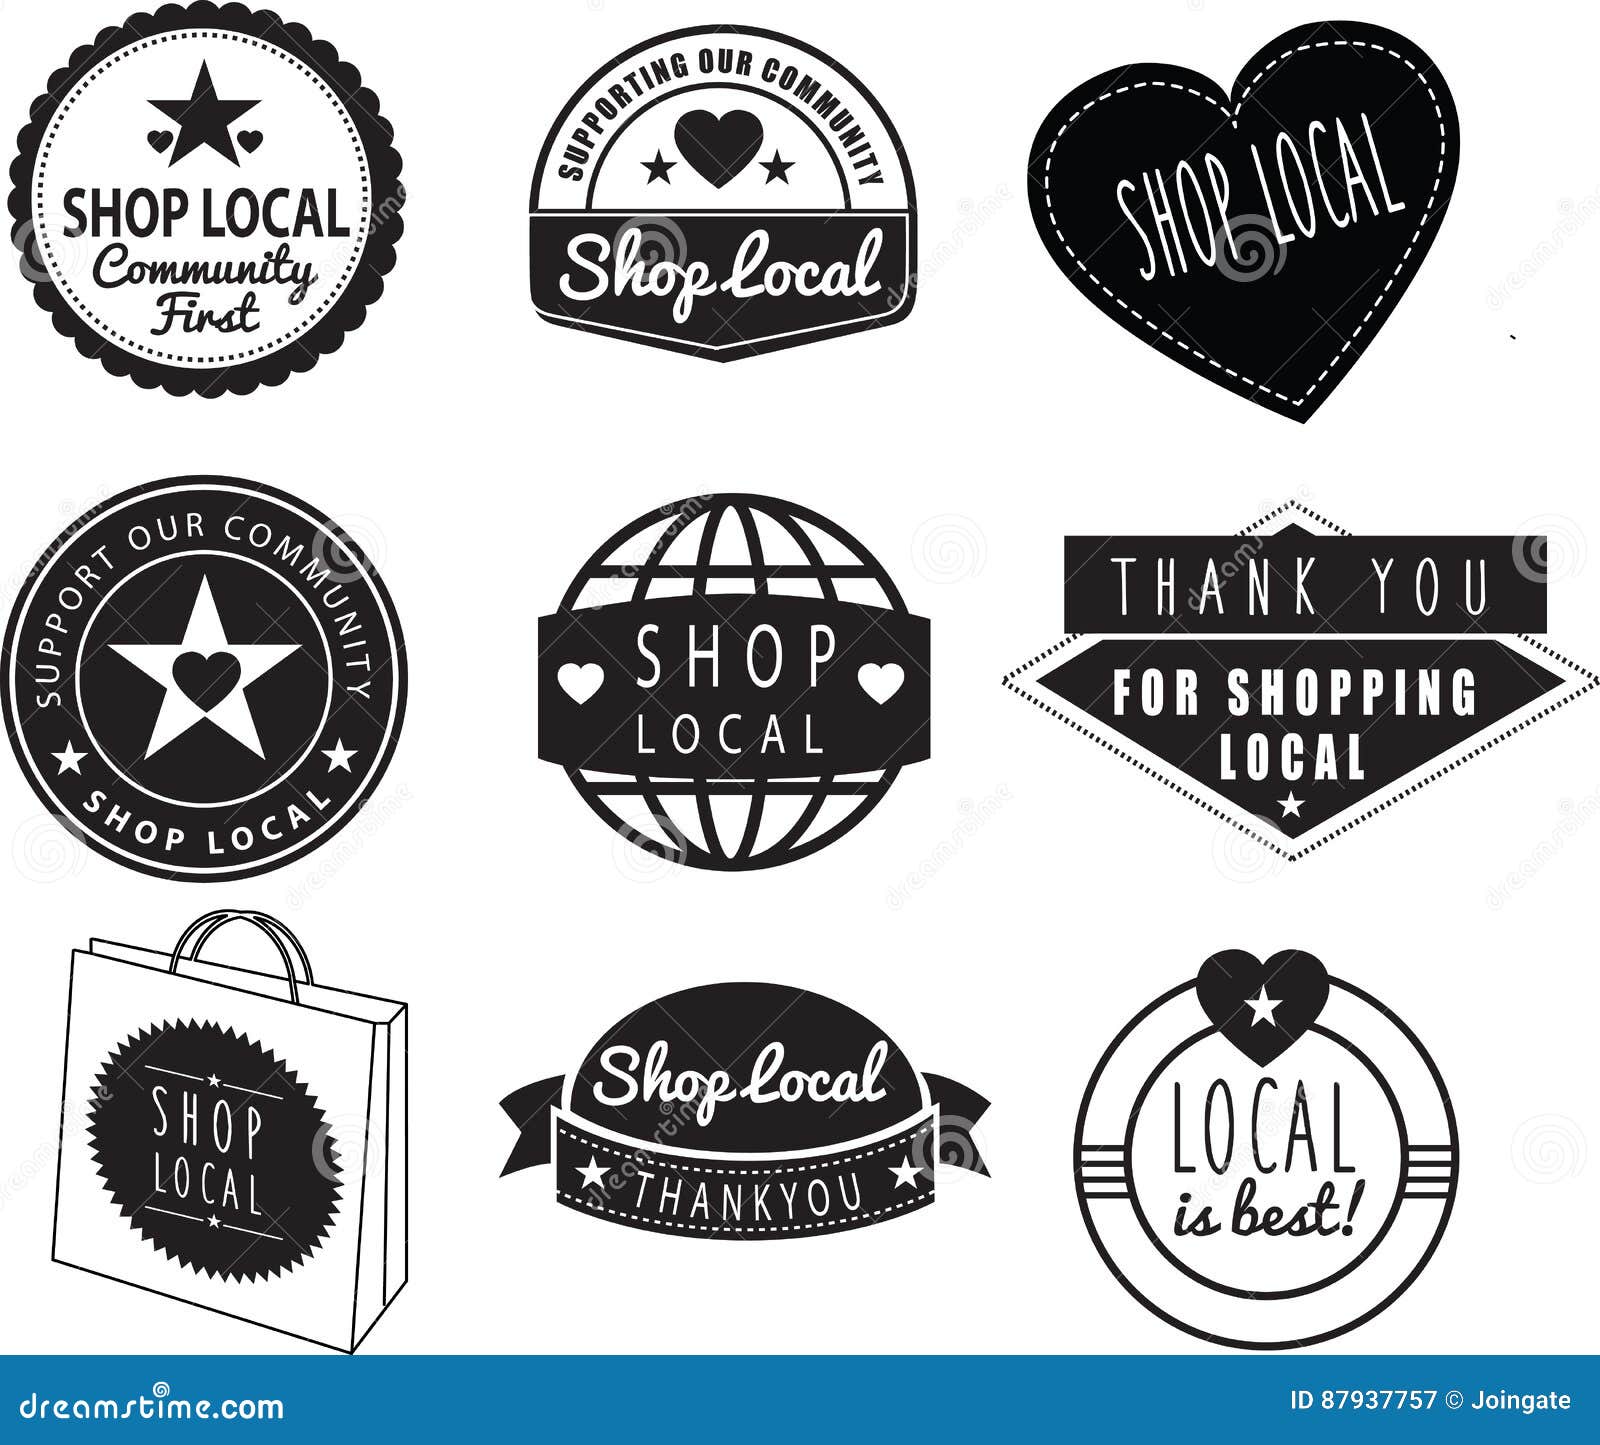 shop local, community shops and stores logos